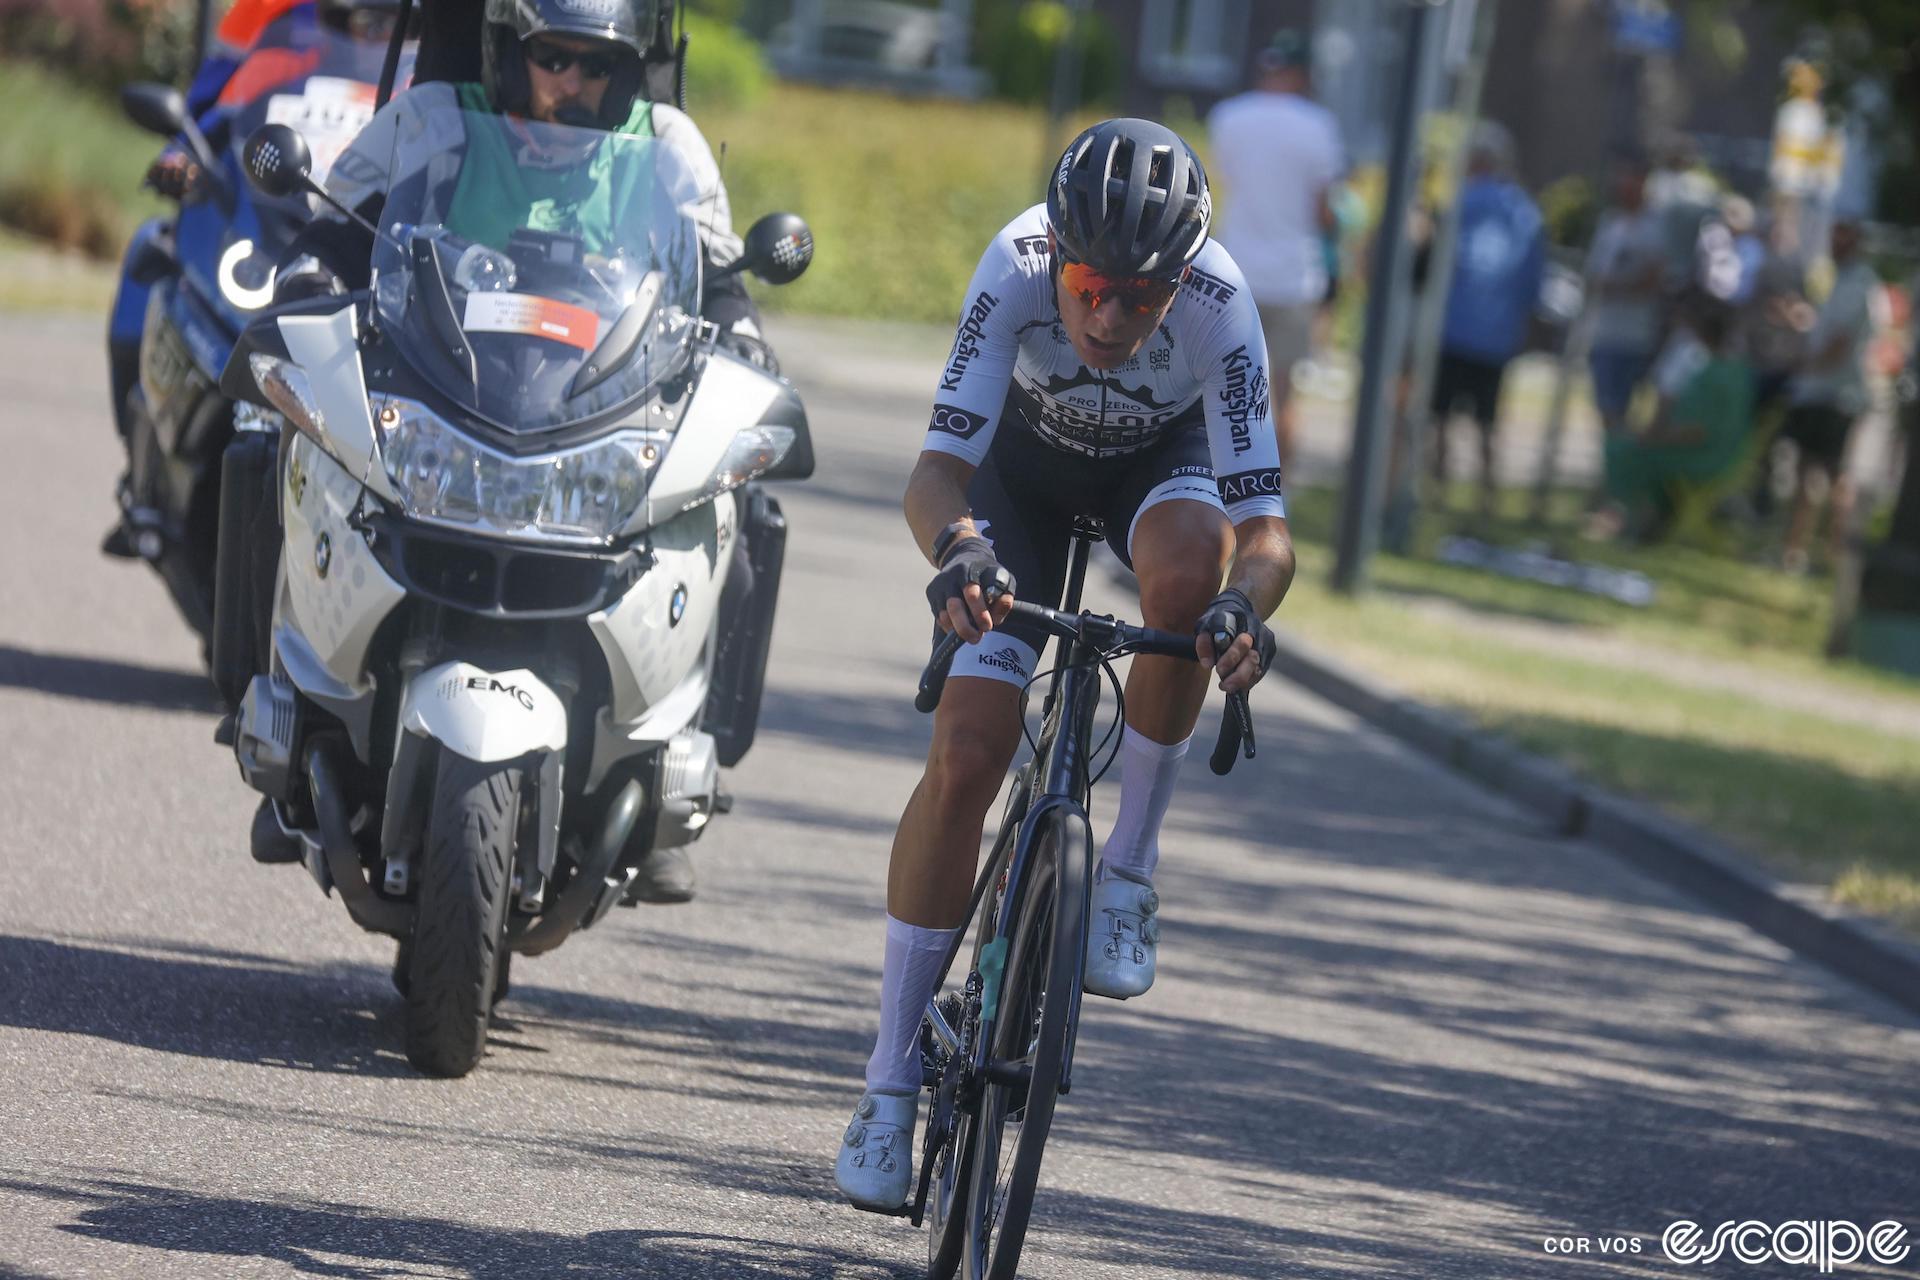 Frank van den Broek rides solo at the front of the 2023 Dutch national road race championship.